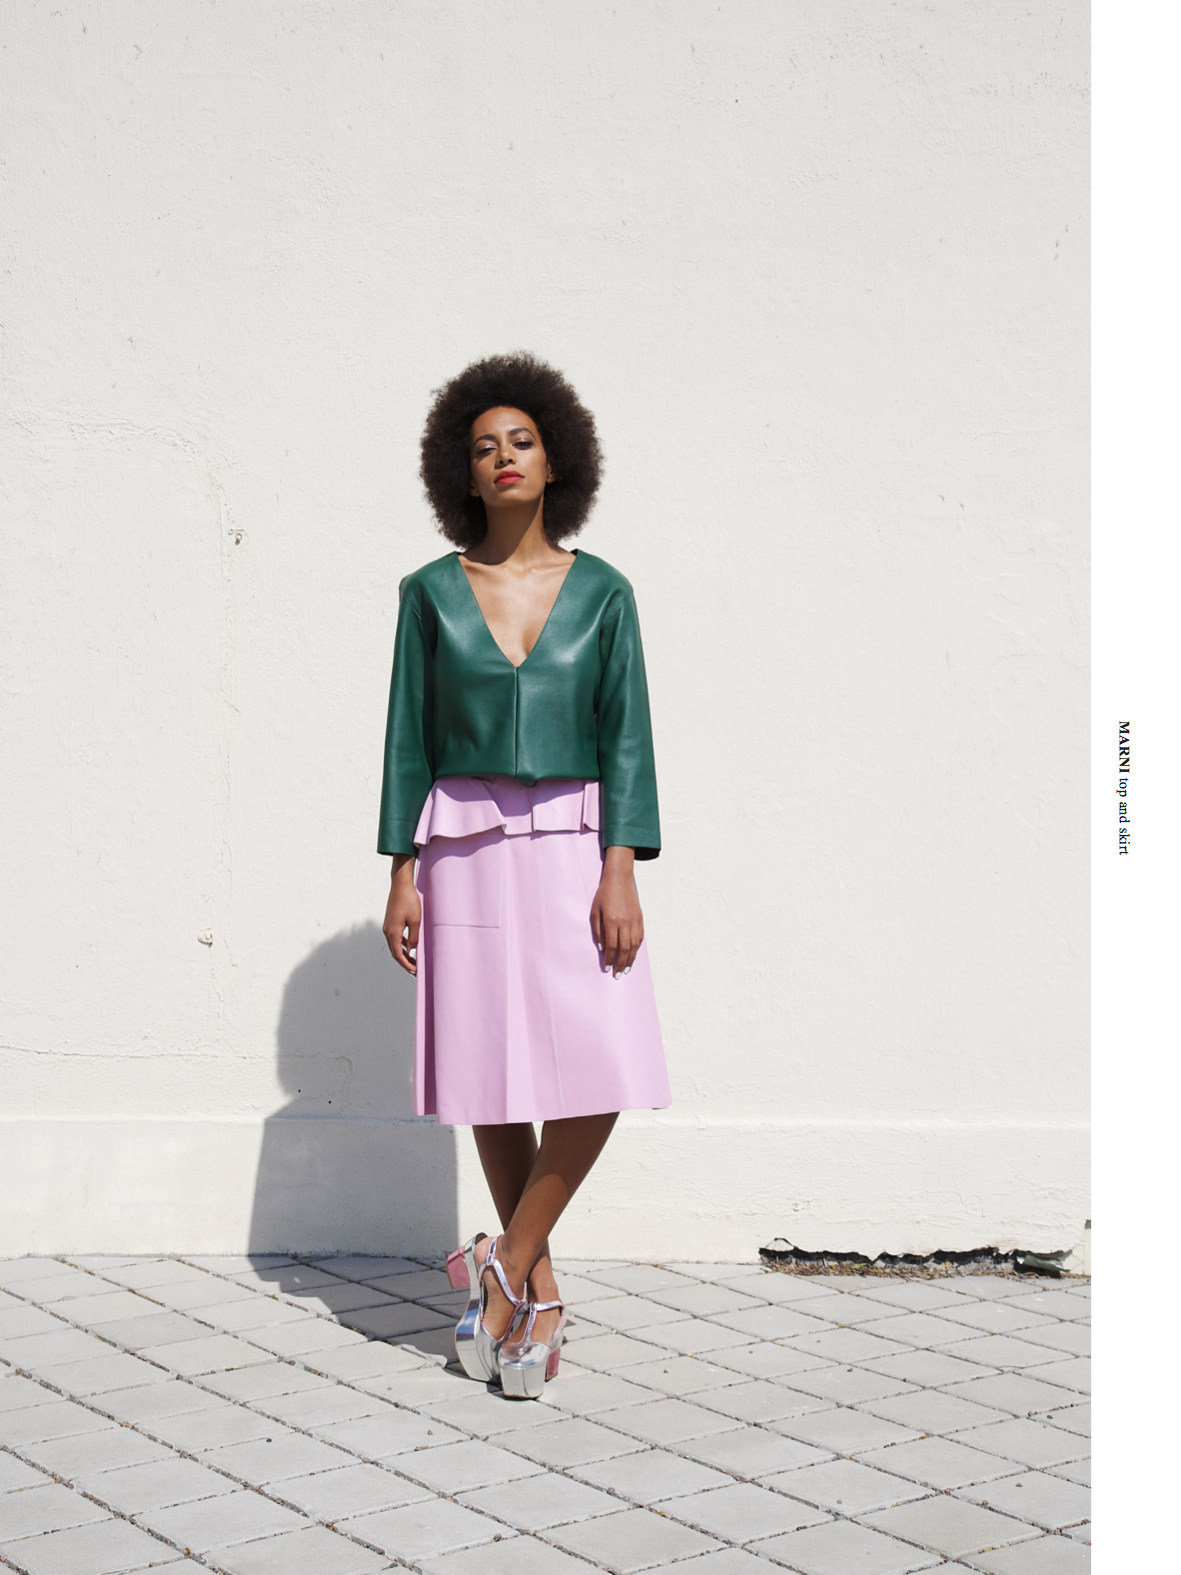 solange knowles work for brooklyn magazine by io tillet wright in greenpoint